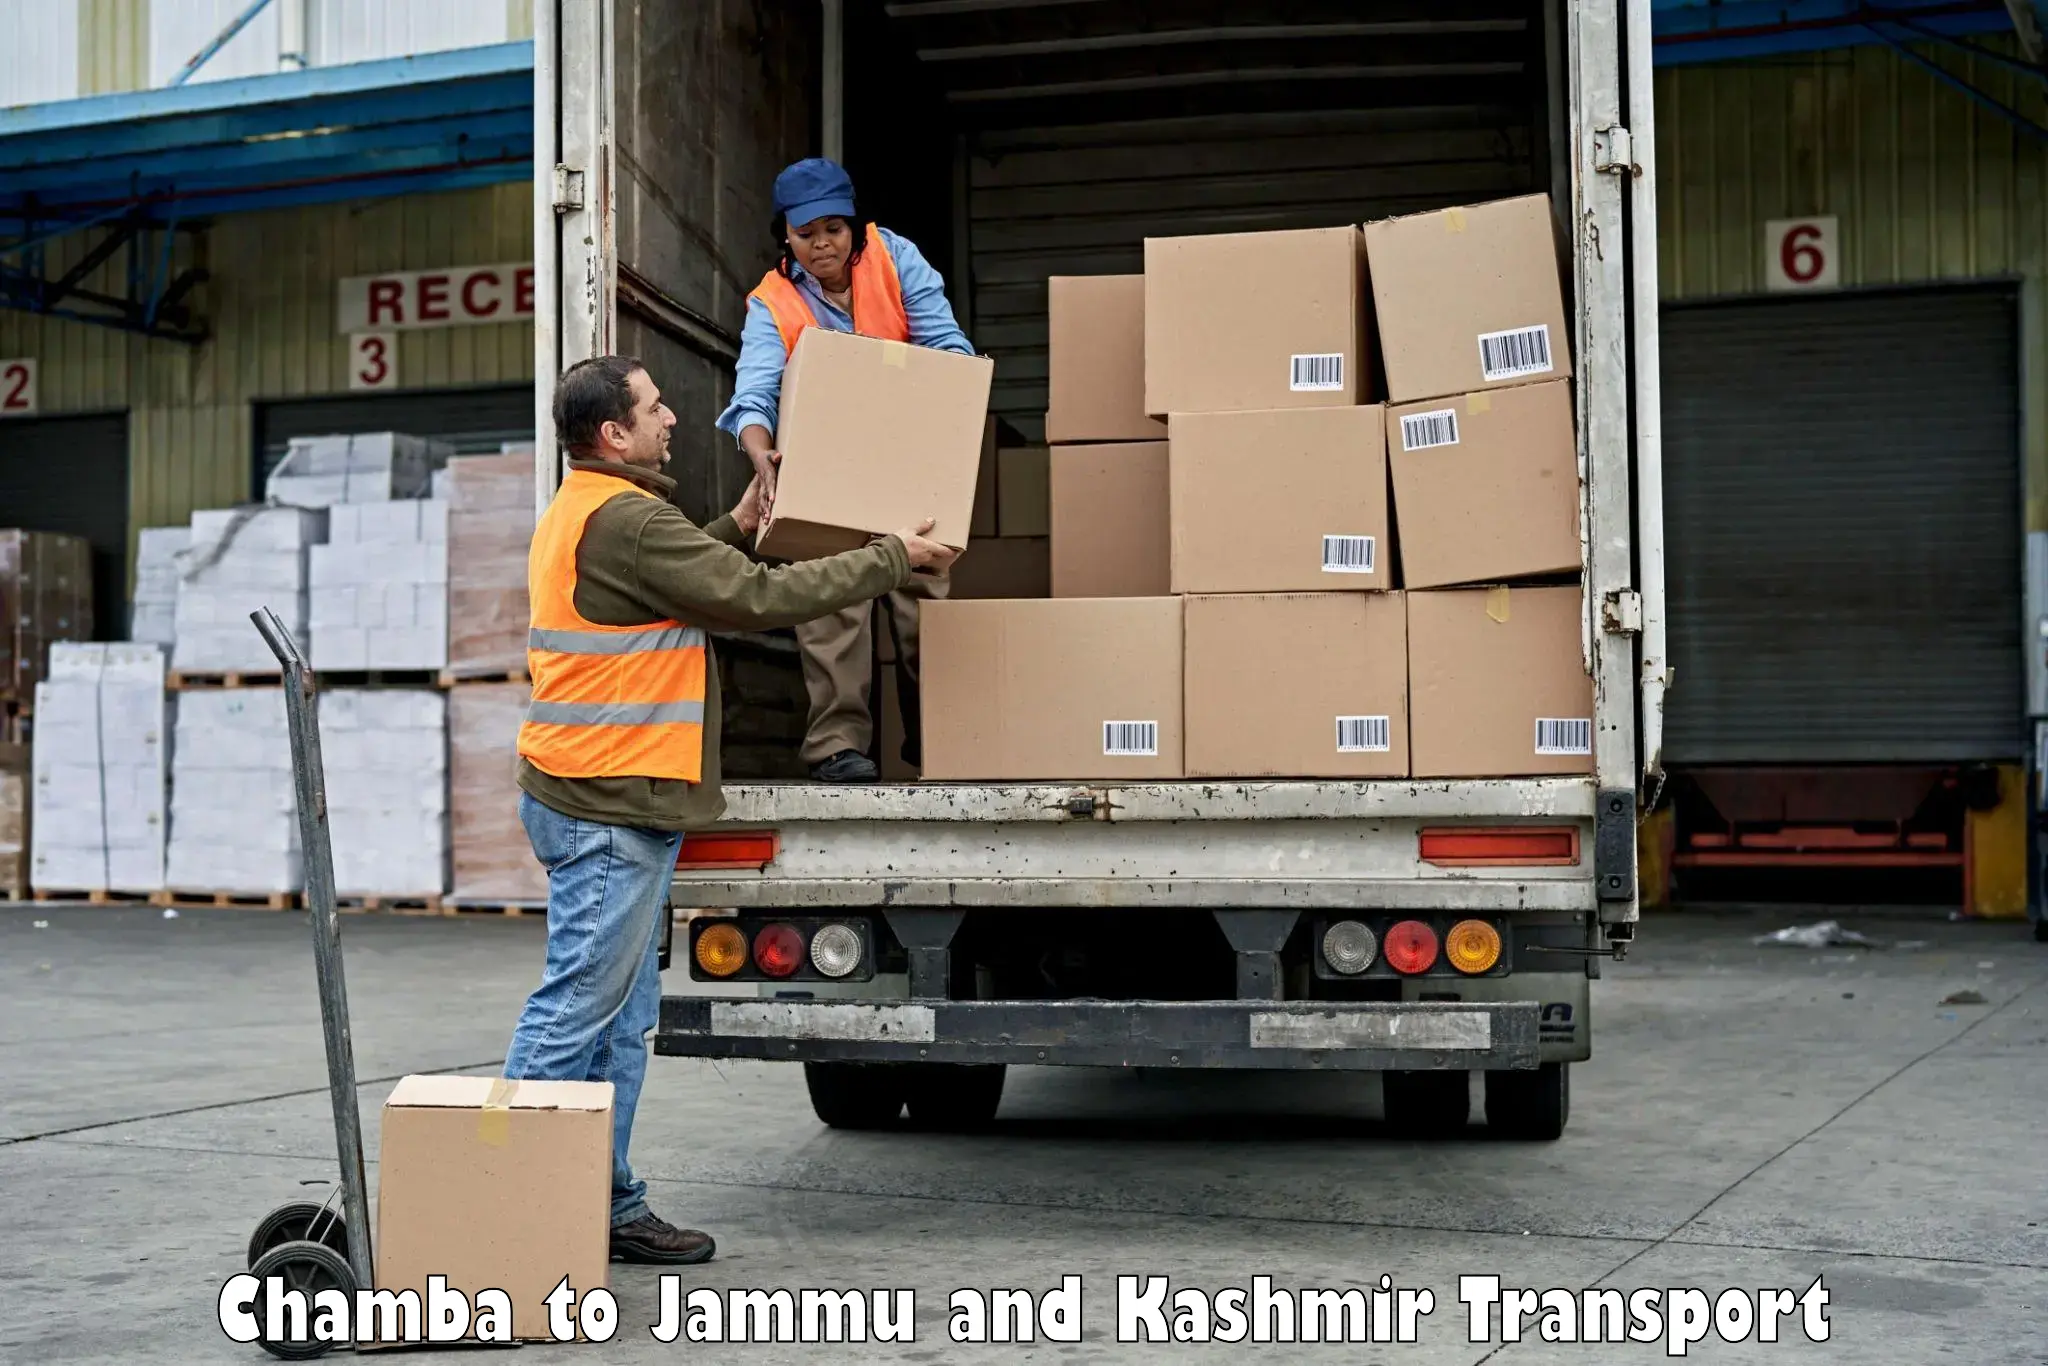 Pick up transport service in Chamba to Jammu and Kashmir